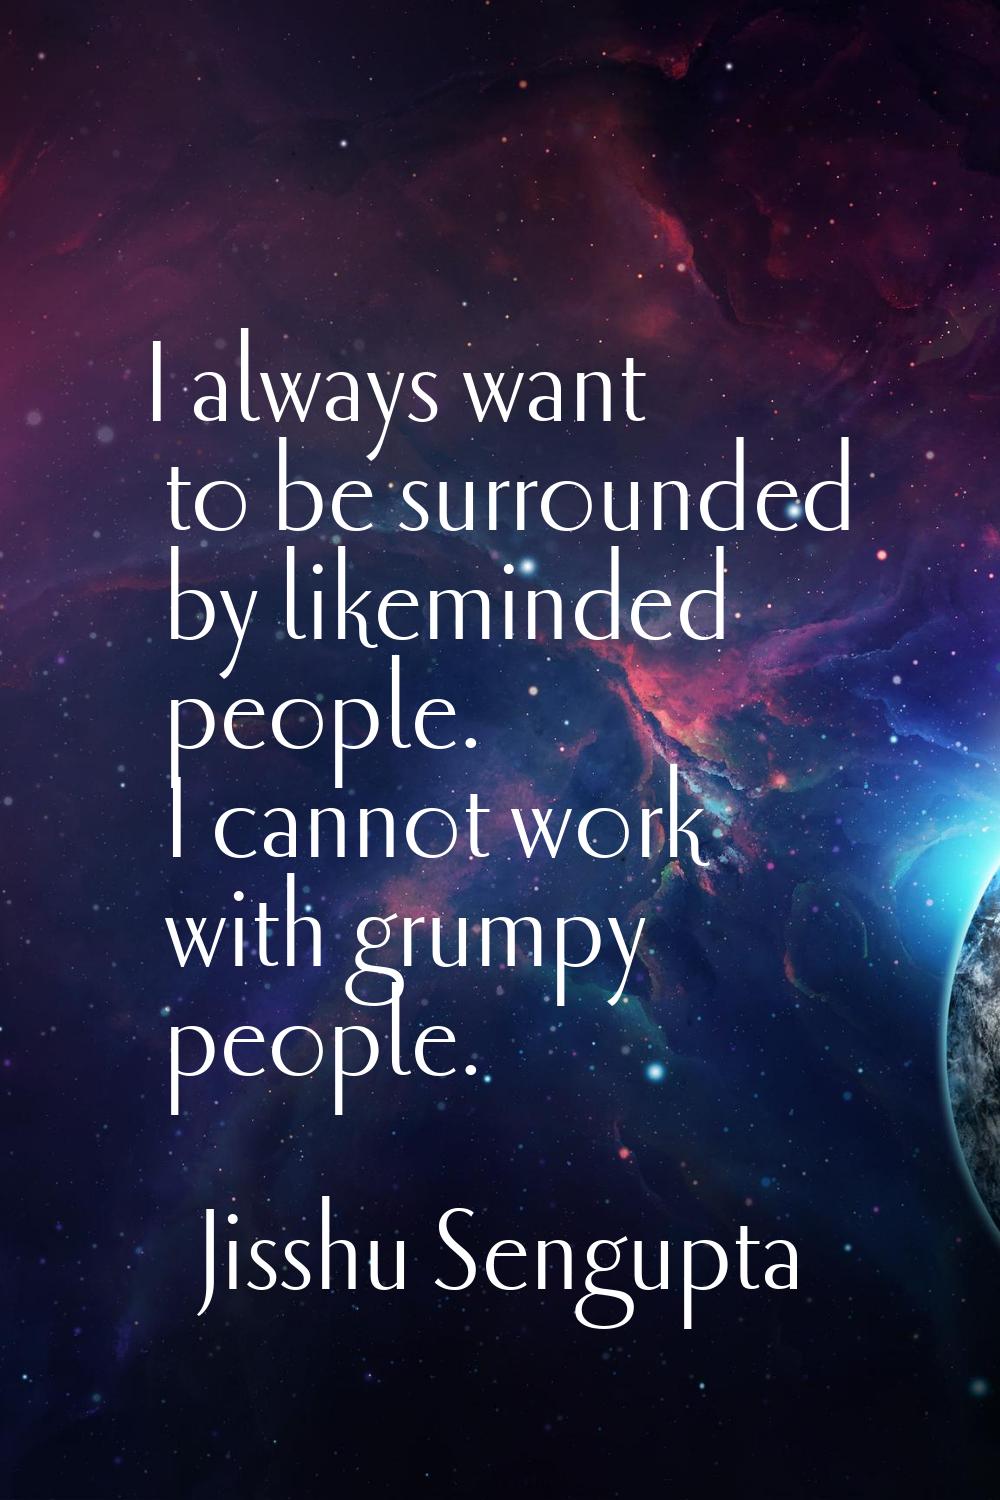 I always want to be surrounded by likeminded people. I cannot work with grumpy people.